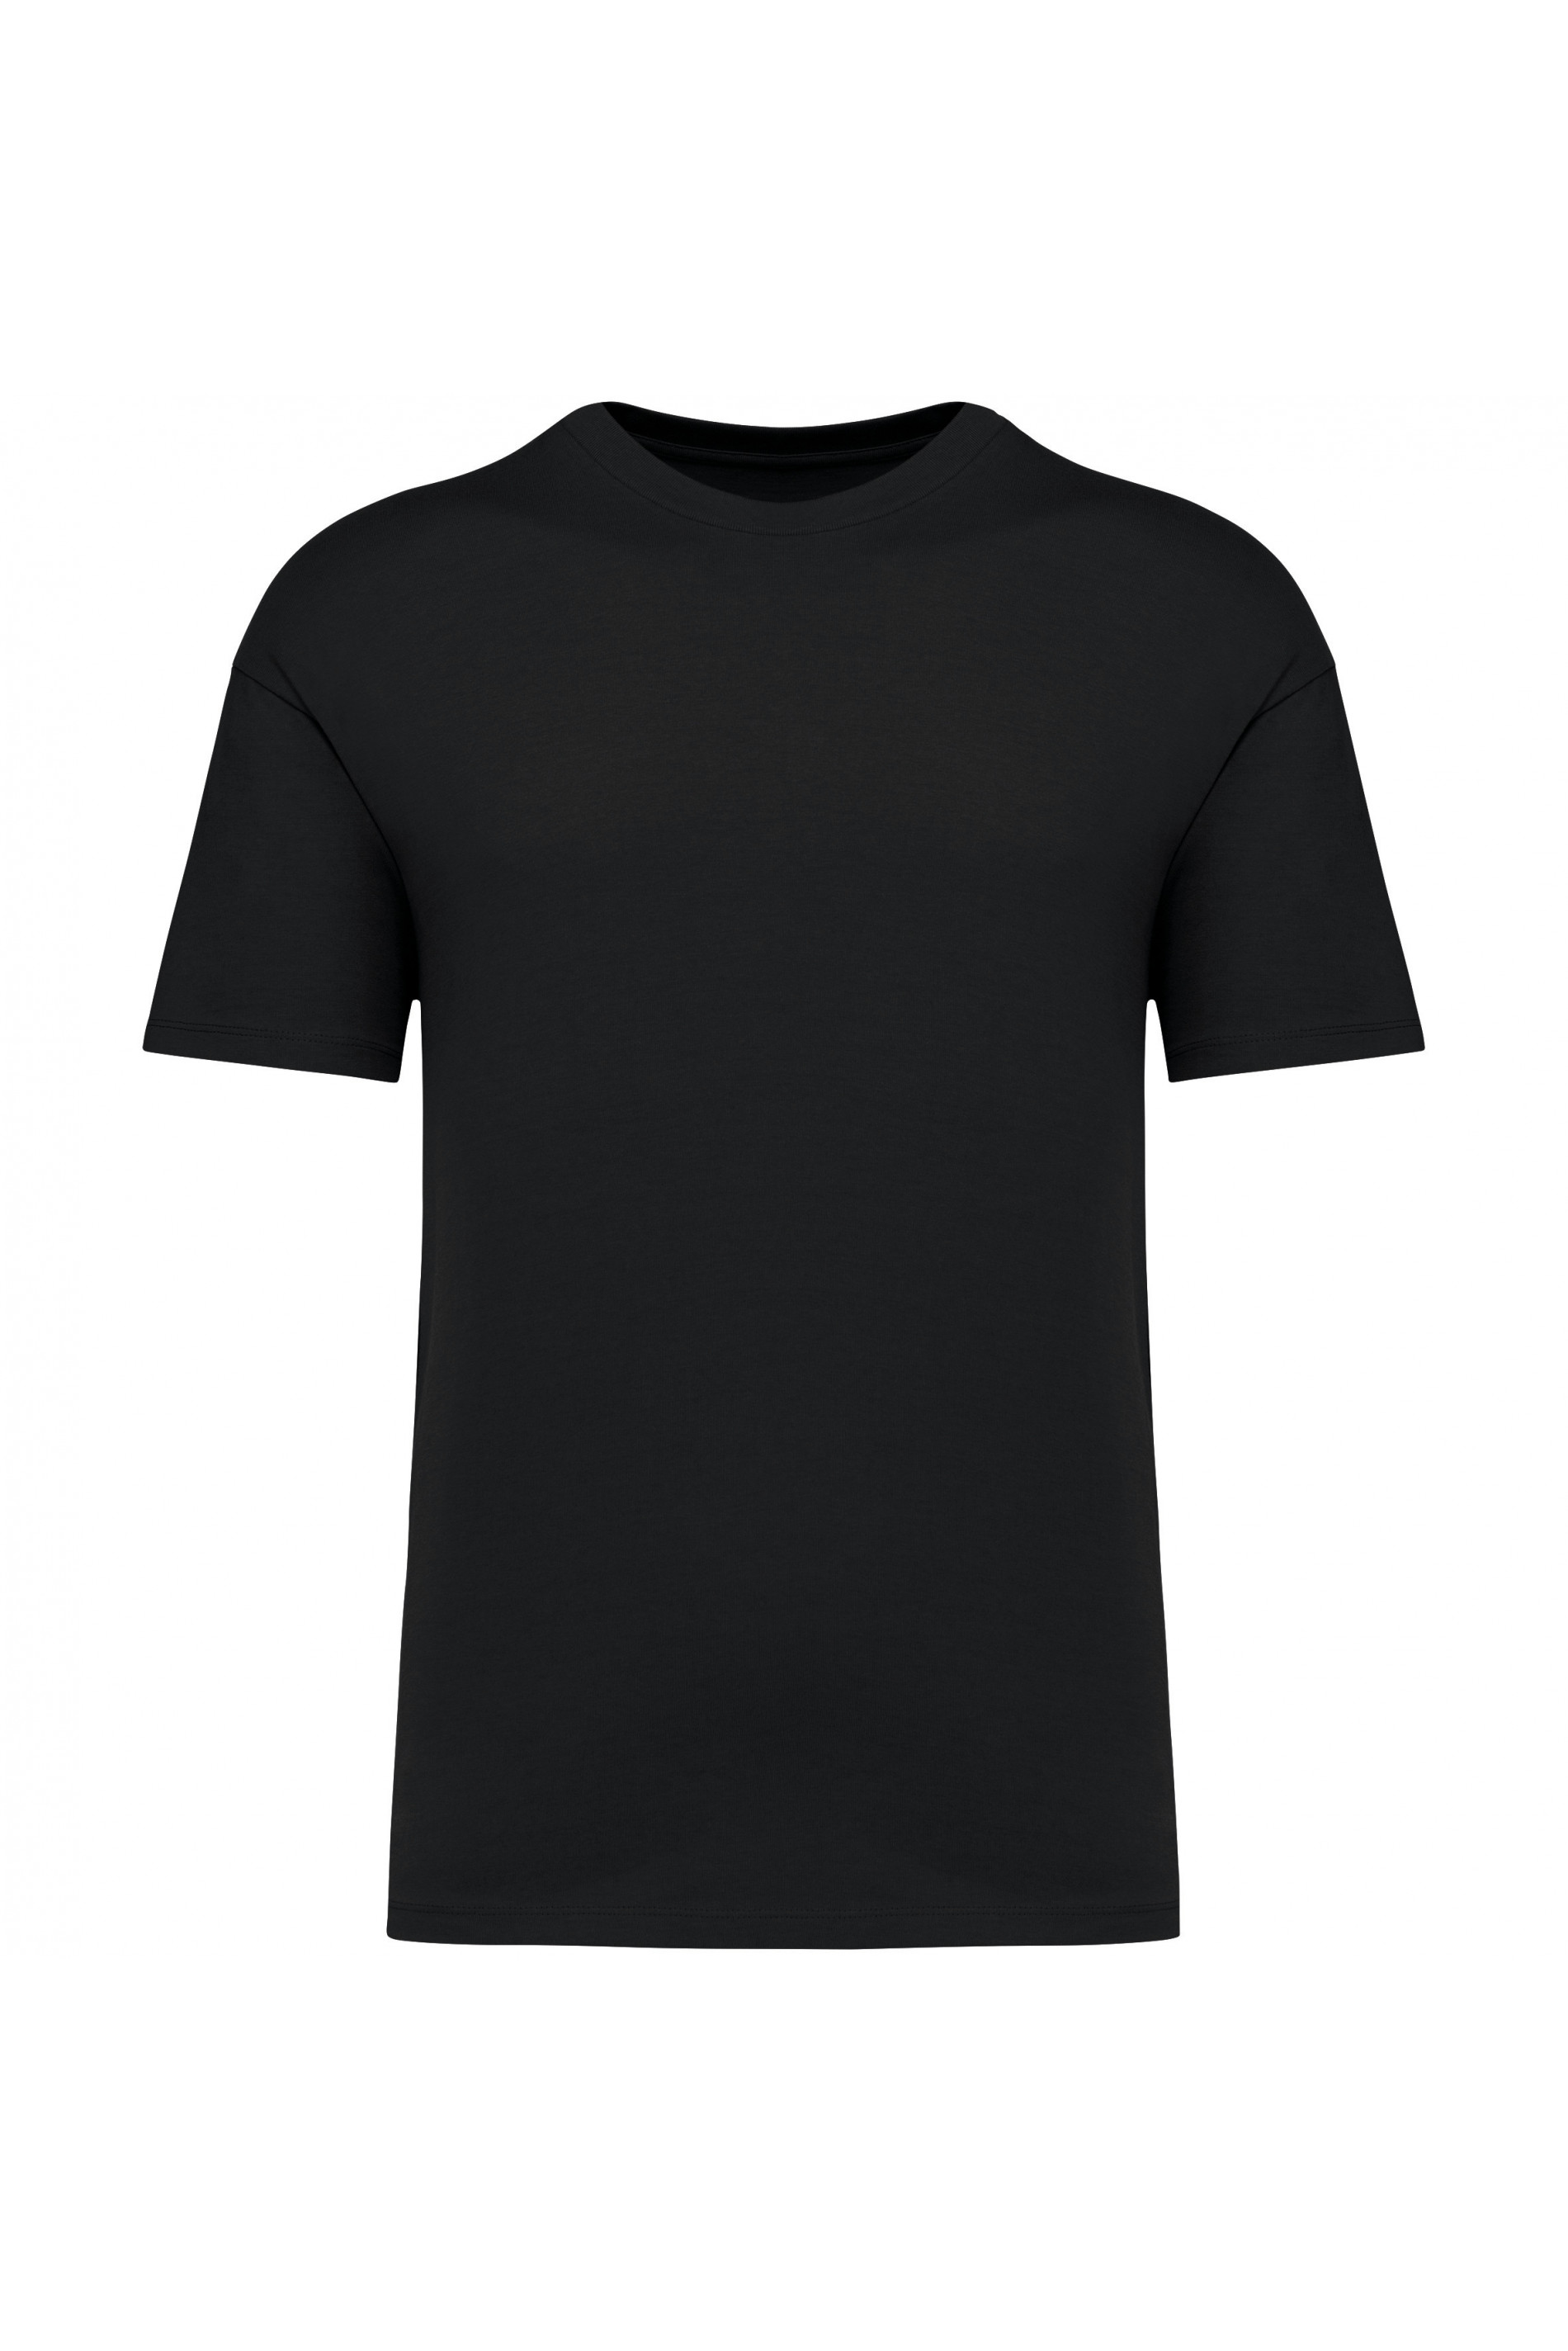 Organic T-shirt with dropped shoulders 200 g/m²